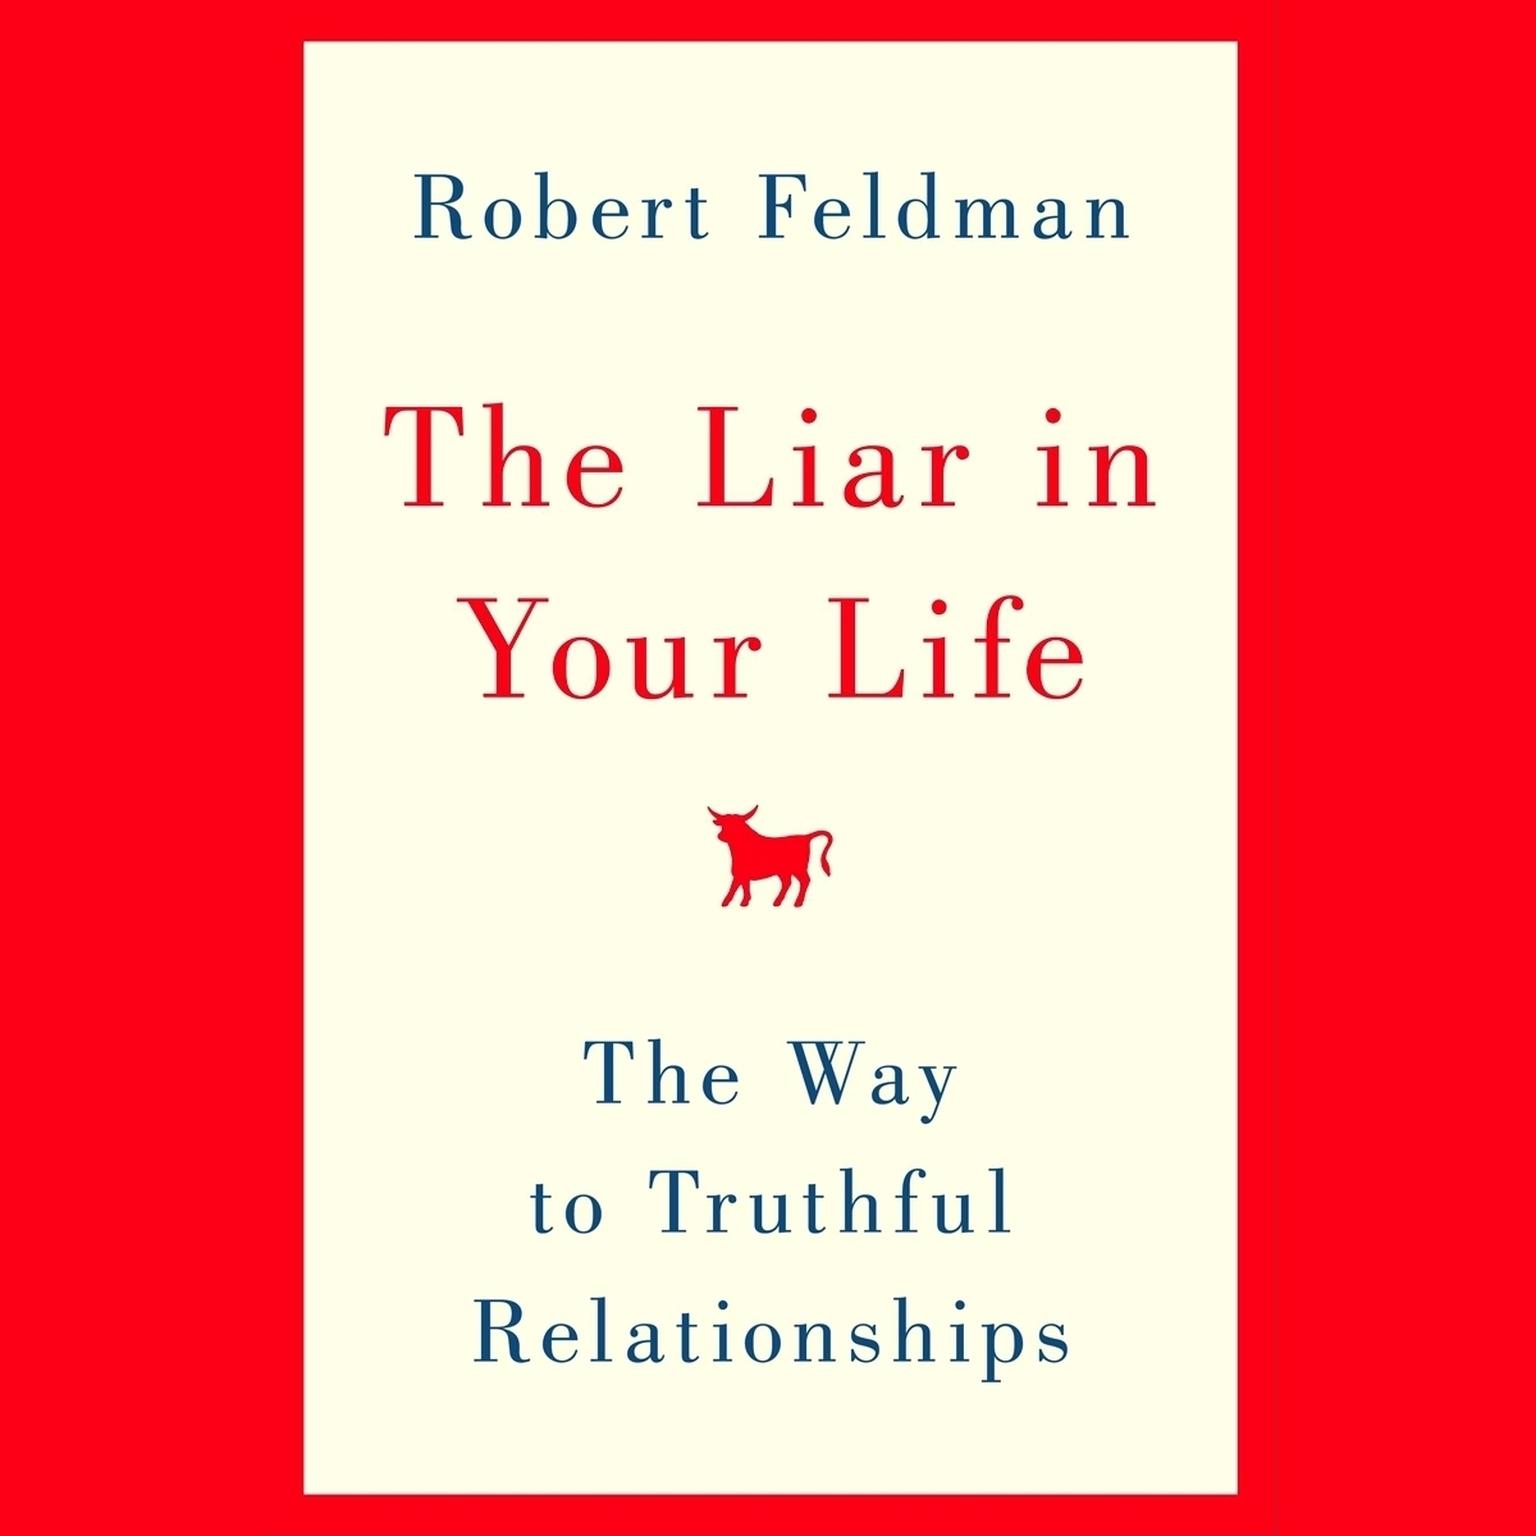 The Liar in Your Life: The Way to Truthful Relationships Audiobook, by Robert Feldman